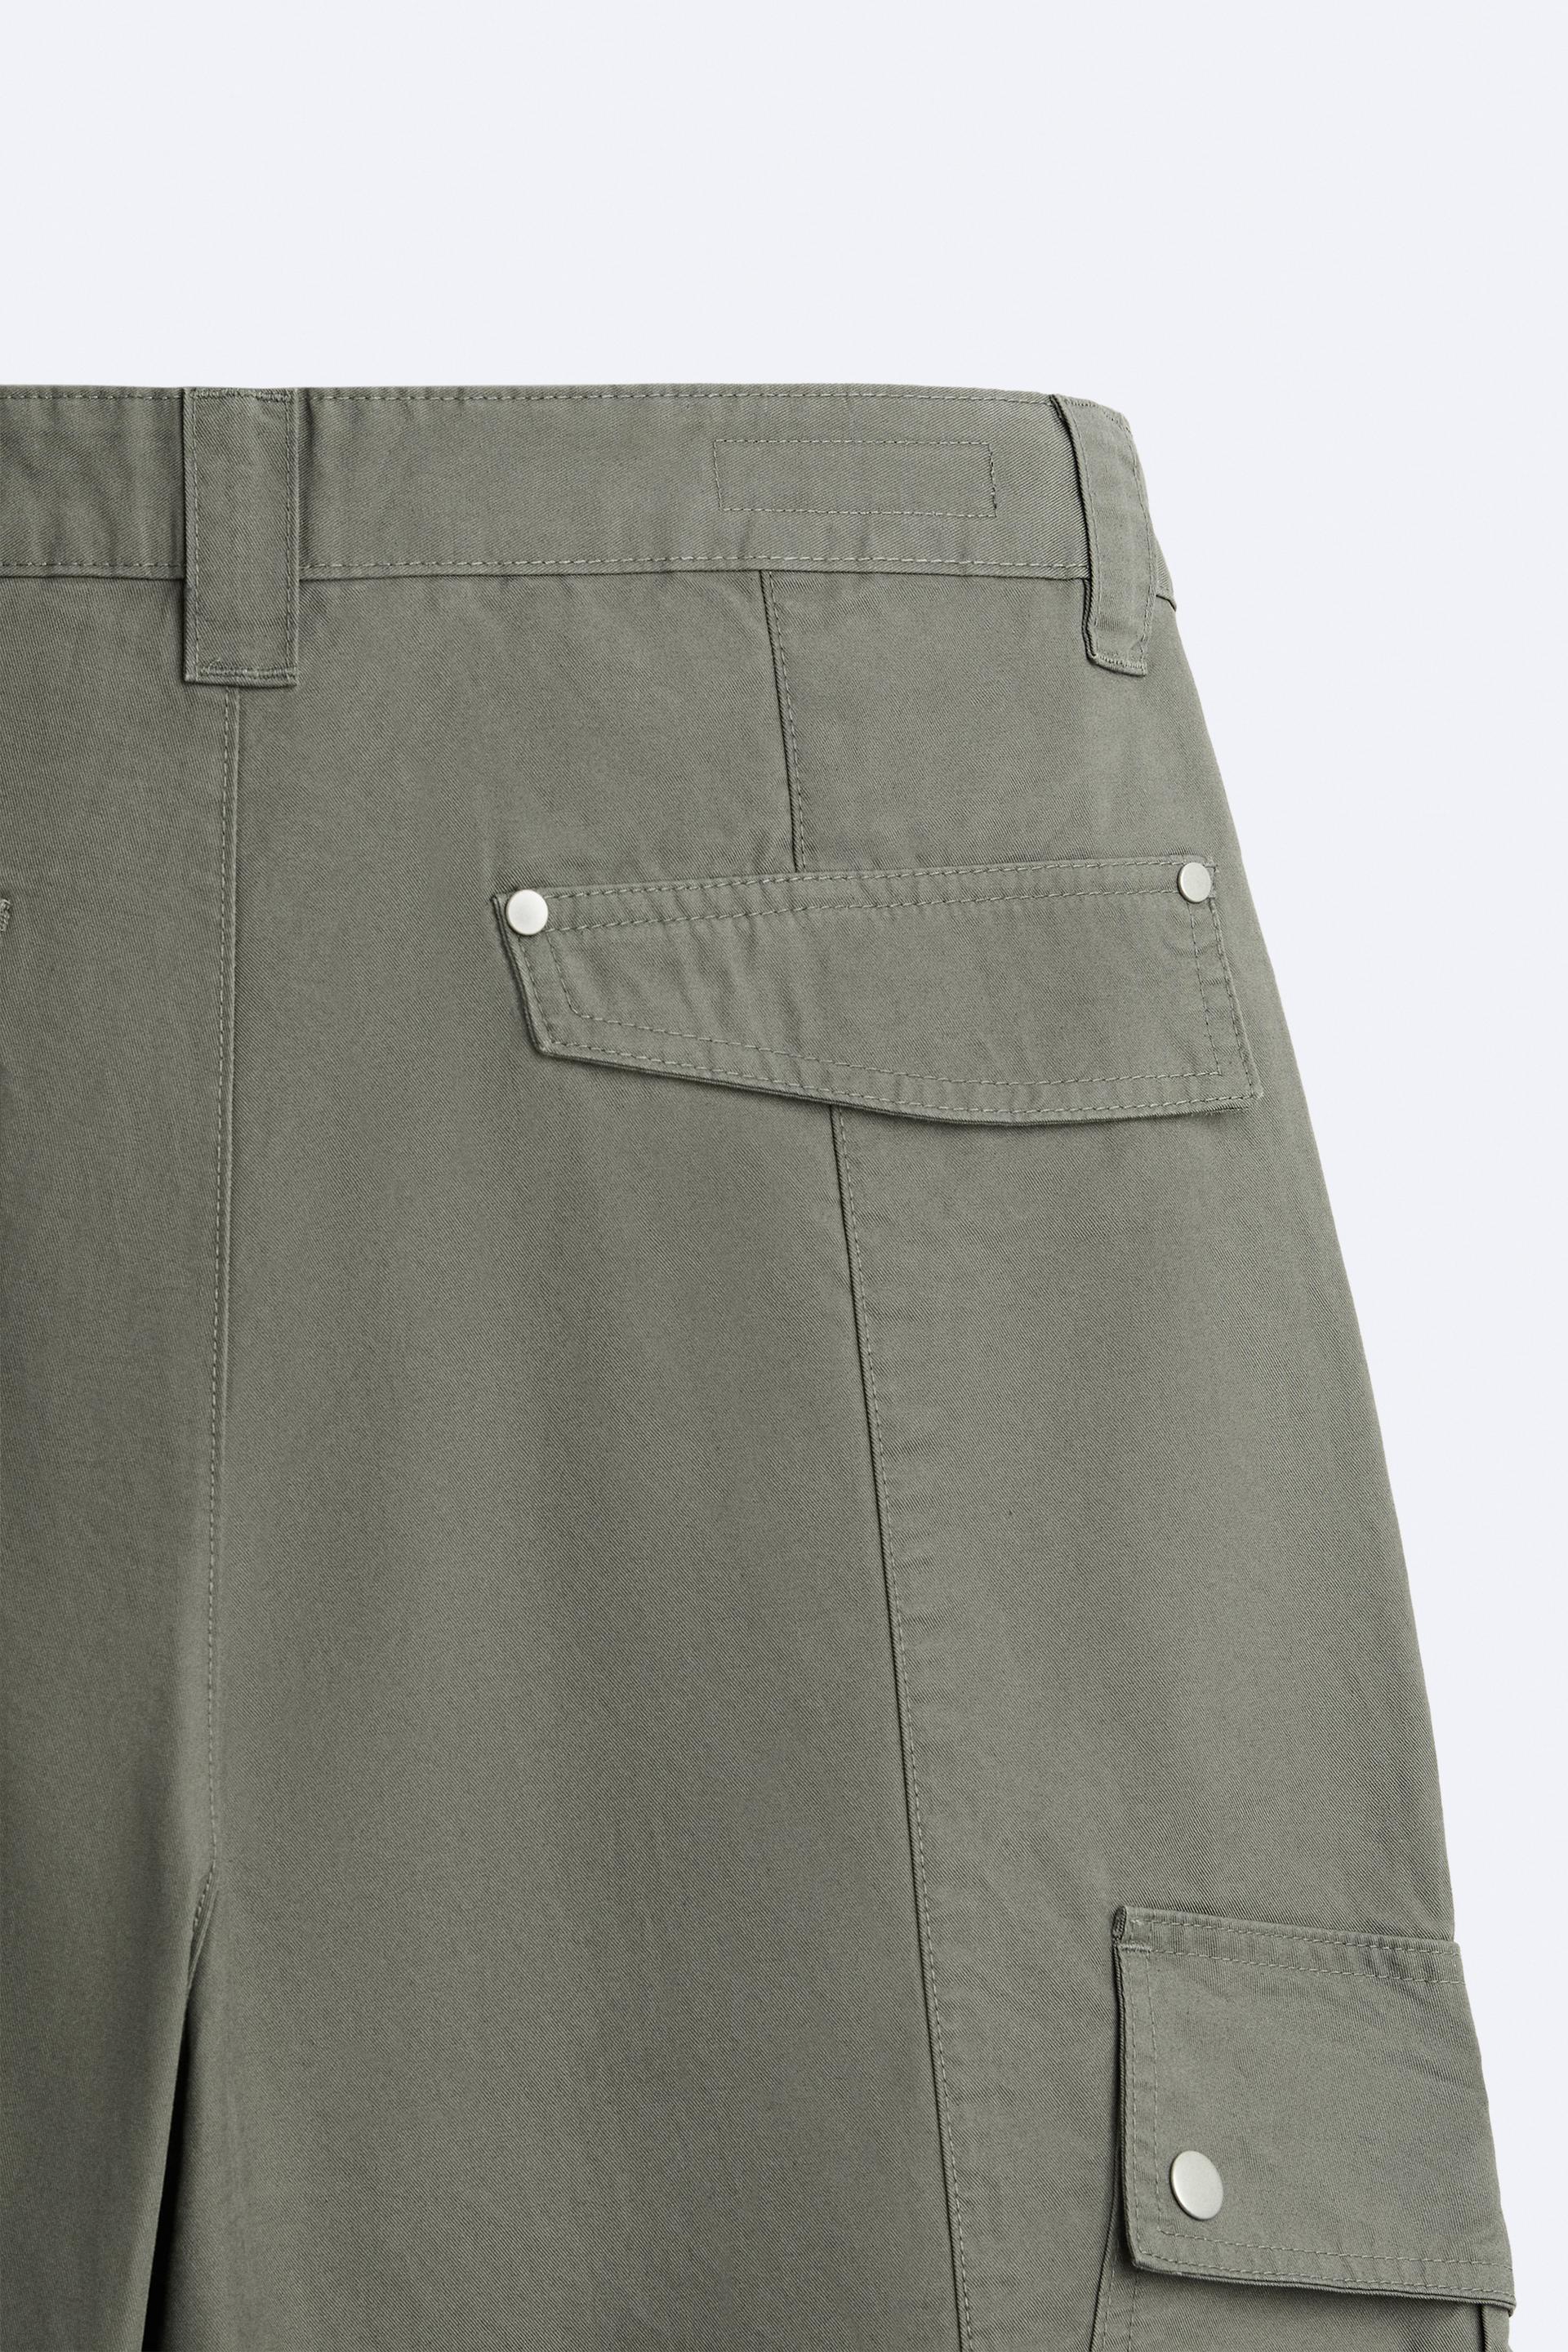 NEW ZARA CARGO PANTS!!! THESE ARE TOO GOOD! (linked in description box) 